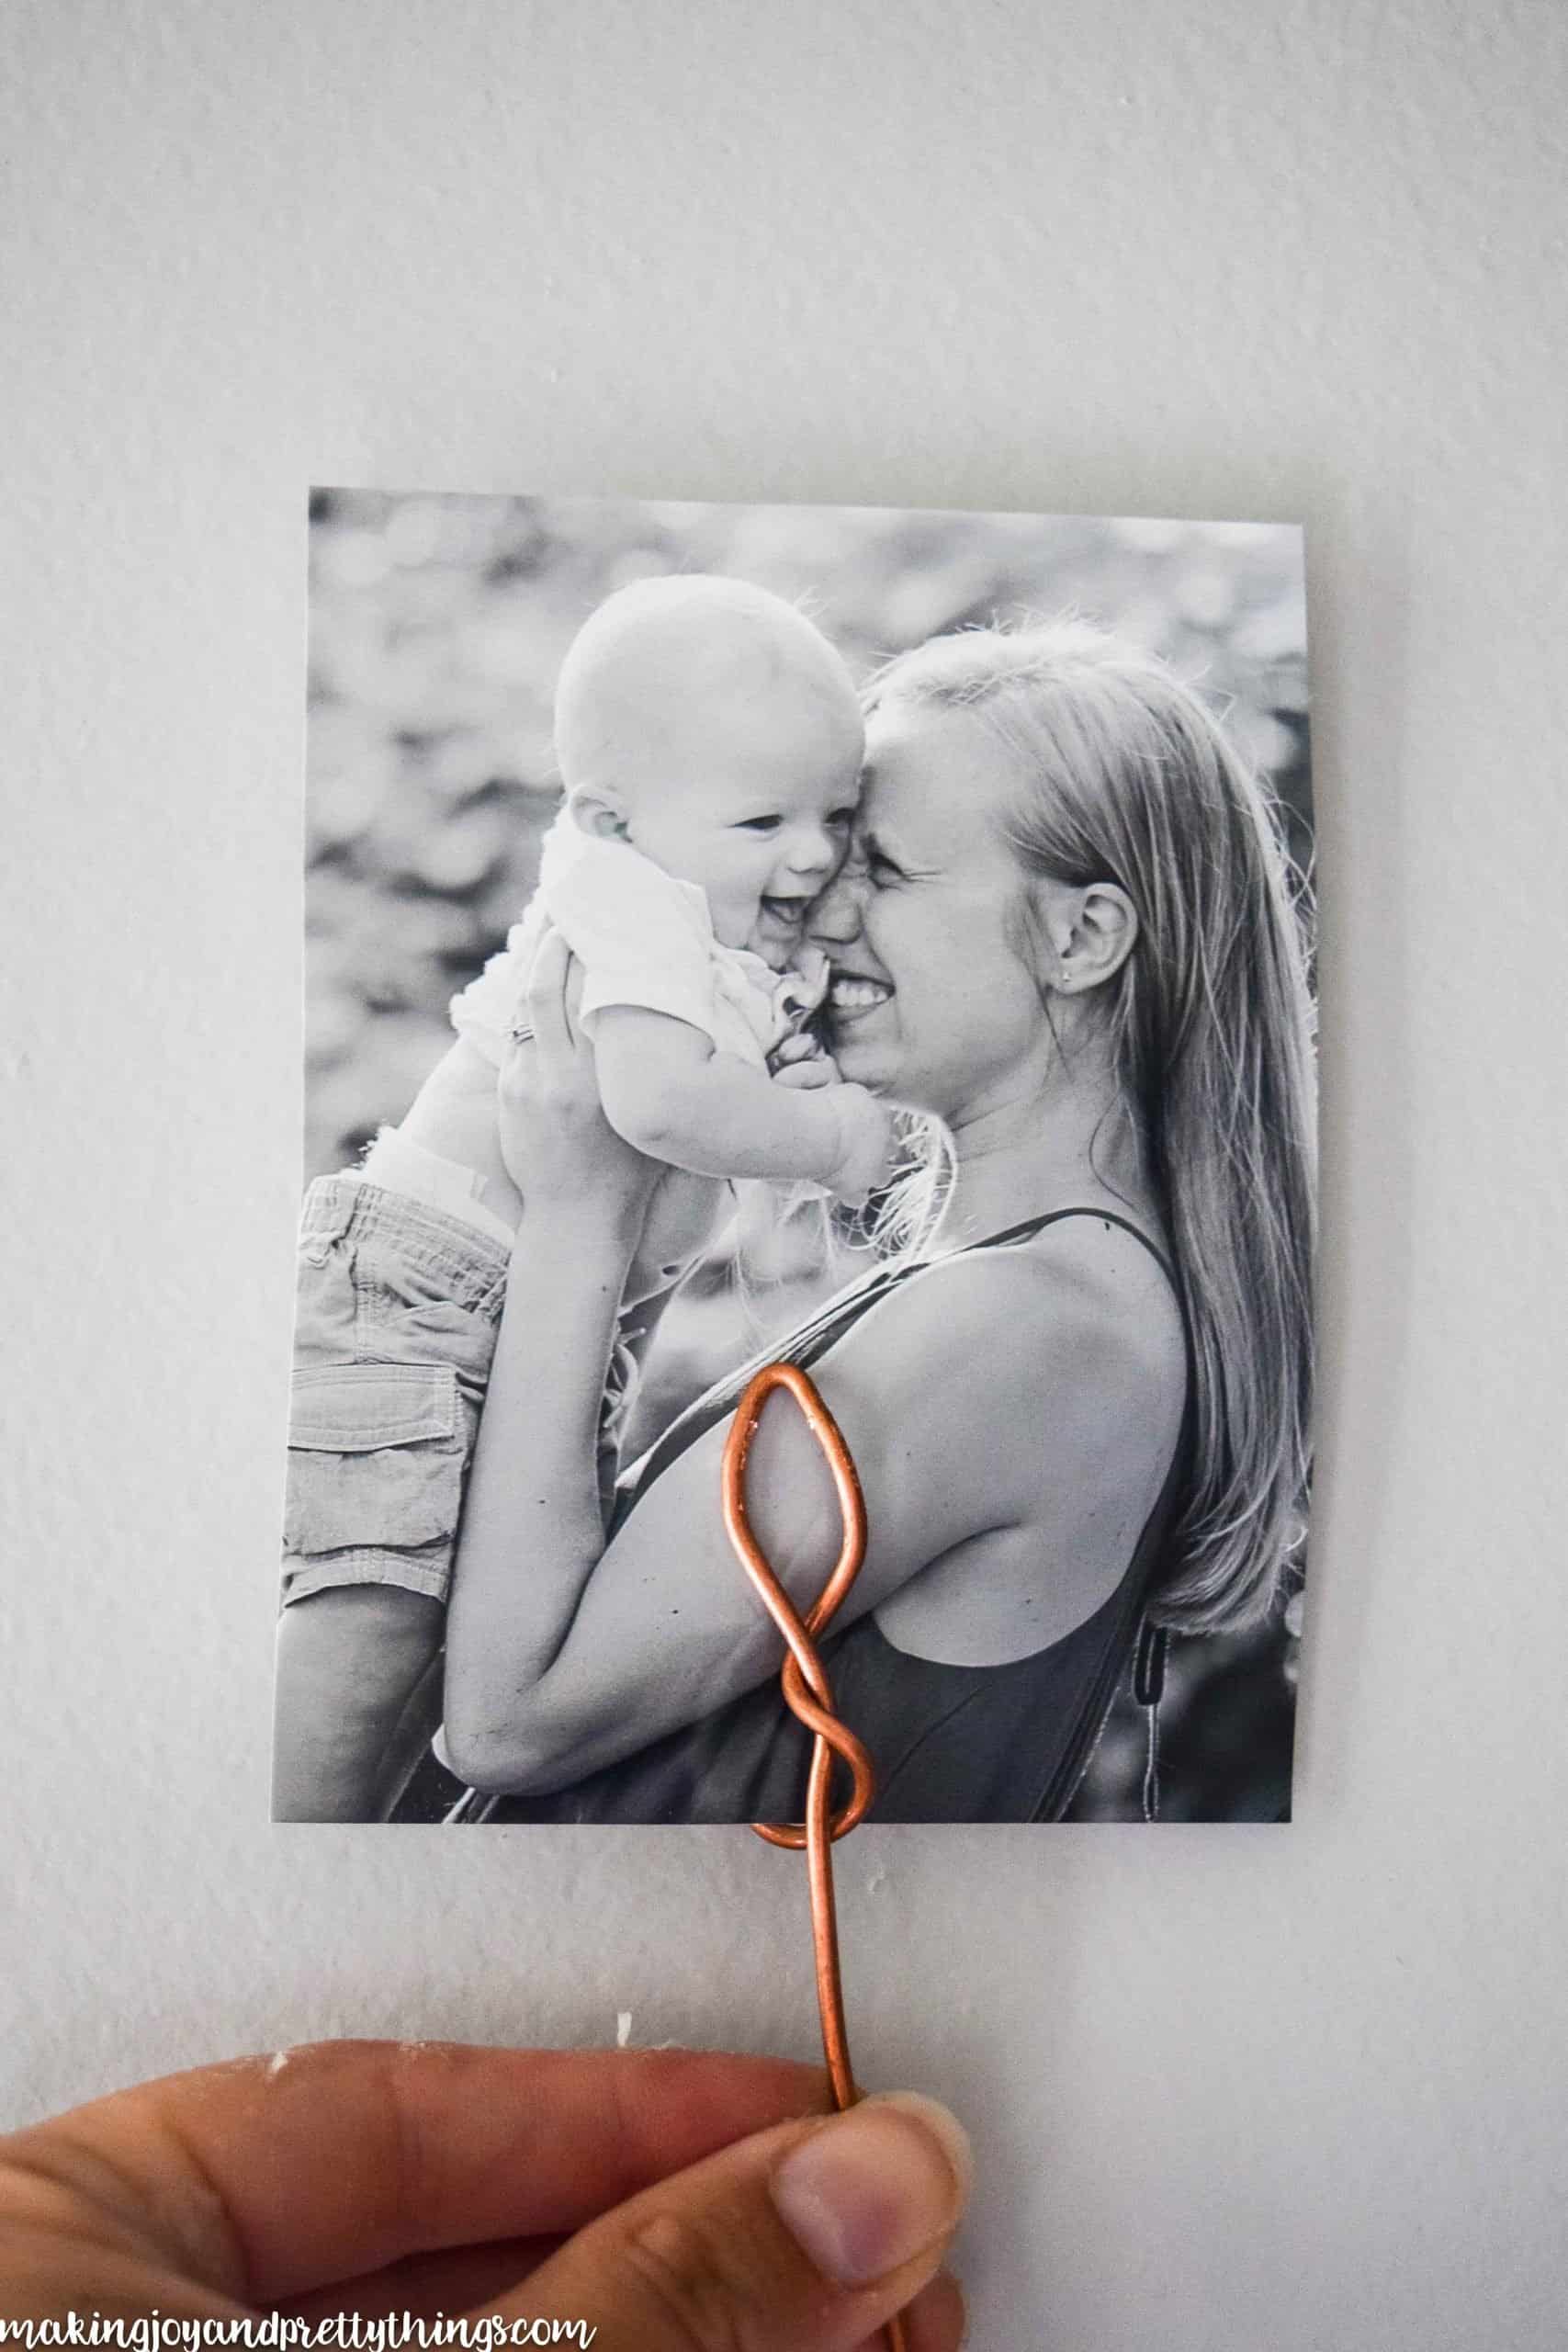 Want to display a family photo but need a creative way to do so? This DIY wire photo holder is a great tutorial to do so 